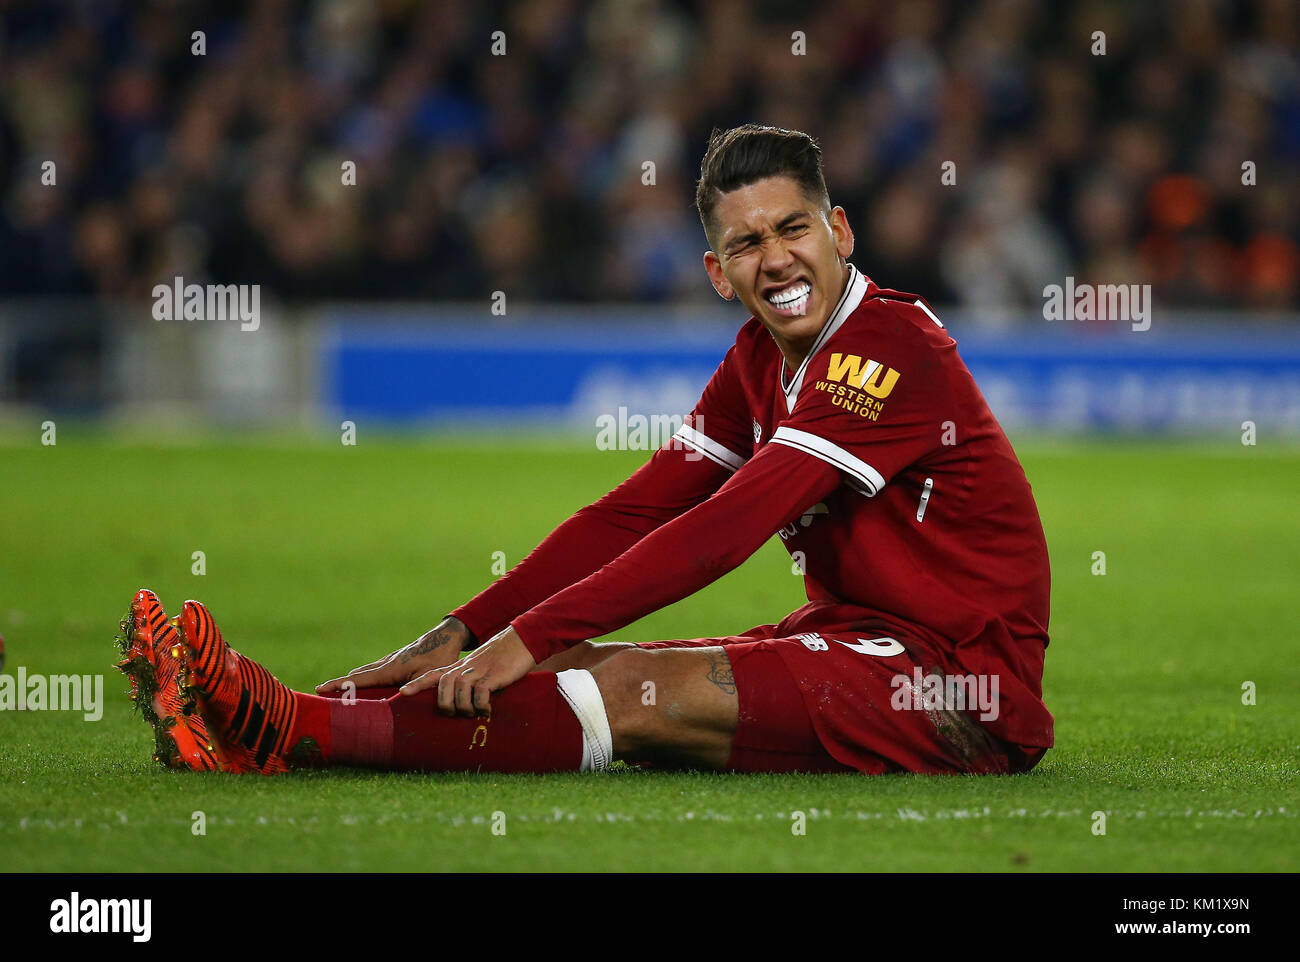 Roberto Firmino of Liverpool grimaces in pain during the Premier League match between Brighton and Hove Albion and Liverpool at the American Express Community Stadium in Brighton and Hove. 02 Dec 2017 *** EDITORIAL USE ONLY *** FA Premier League and Football League images are subject to DataCo Licence see www.football-dataco.com Stock Photo